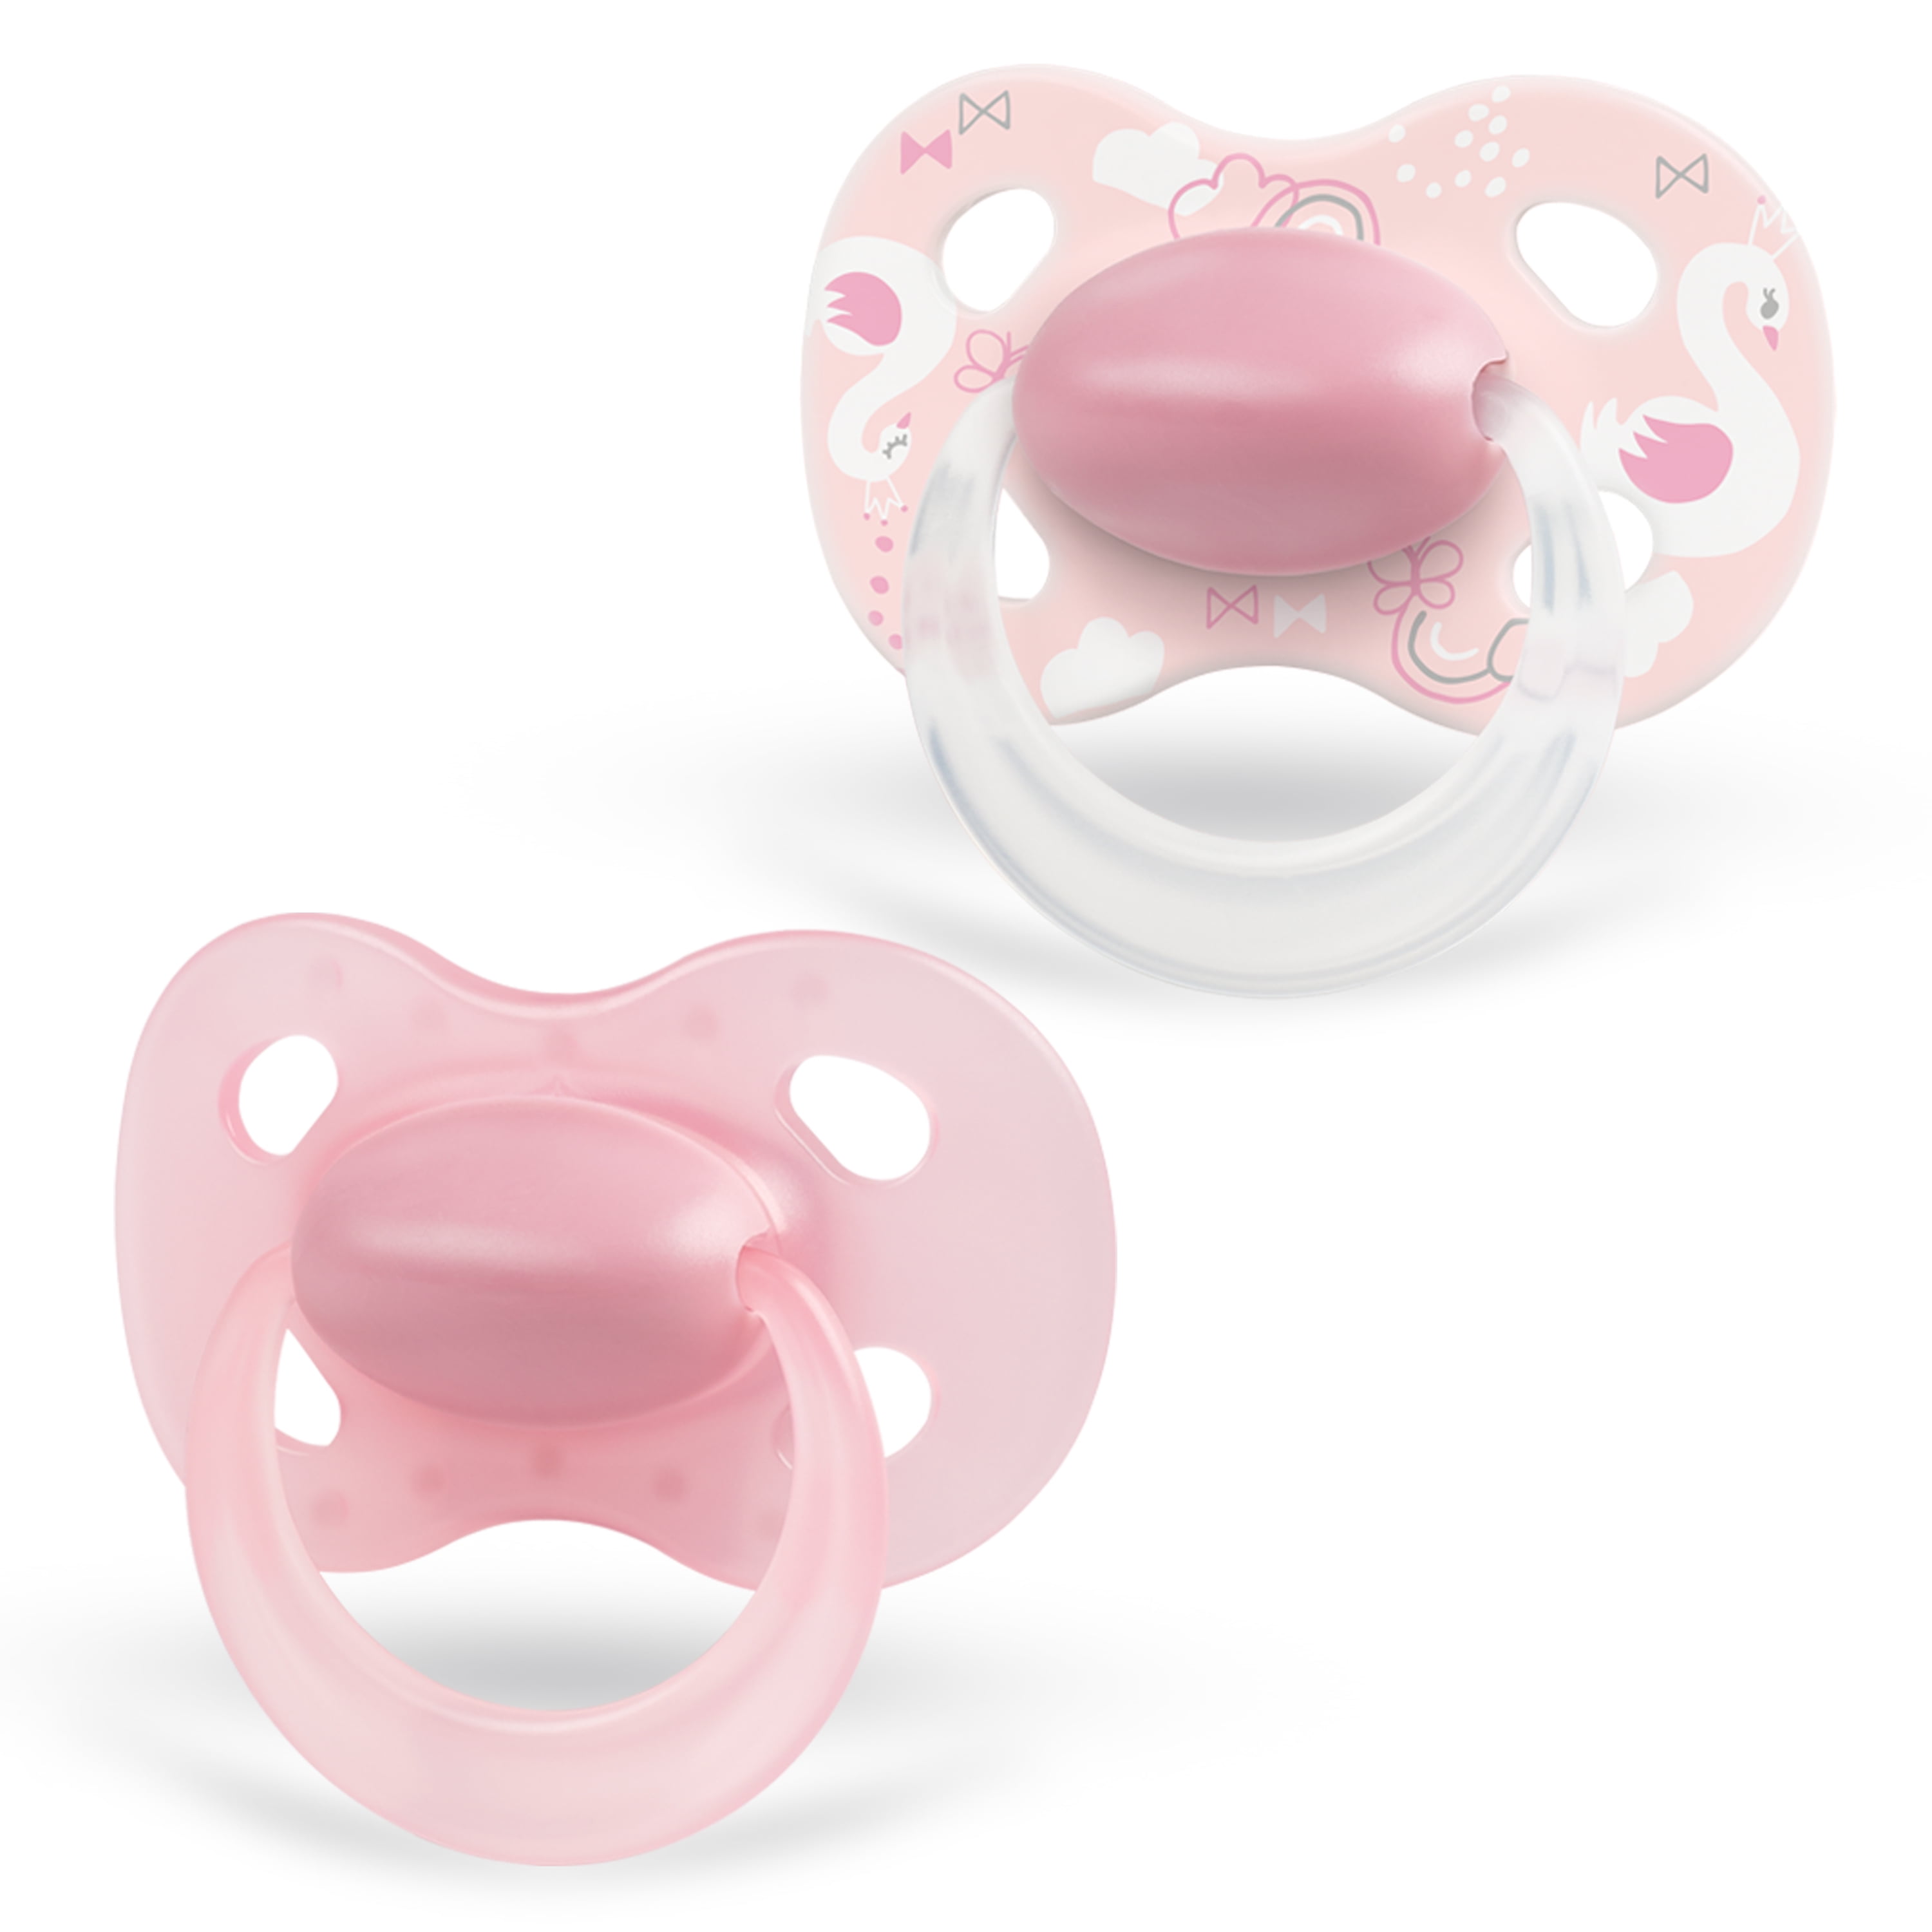 2 Pack Pink Baby Pacifiers Medela Baby Original Pacifier for 0-6 Months Bpa Free Lightweight & Orthodontic Perfect for Everyday Use 